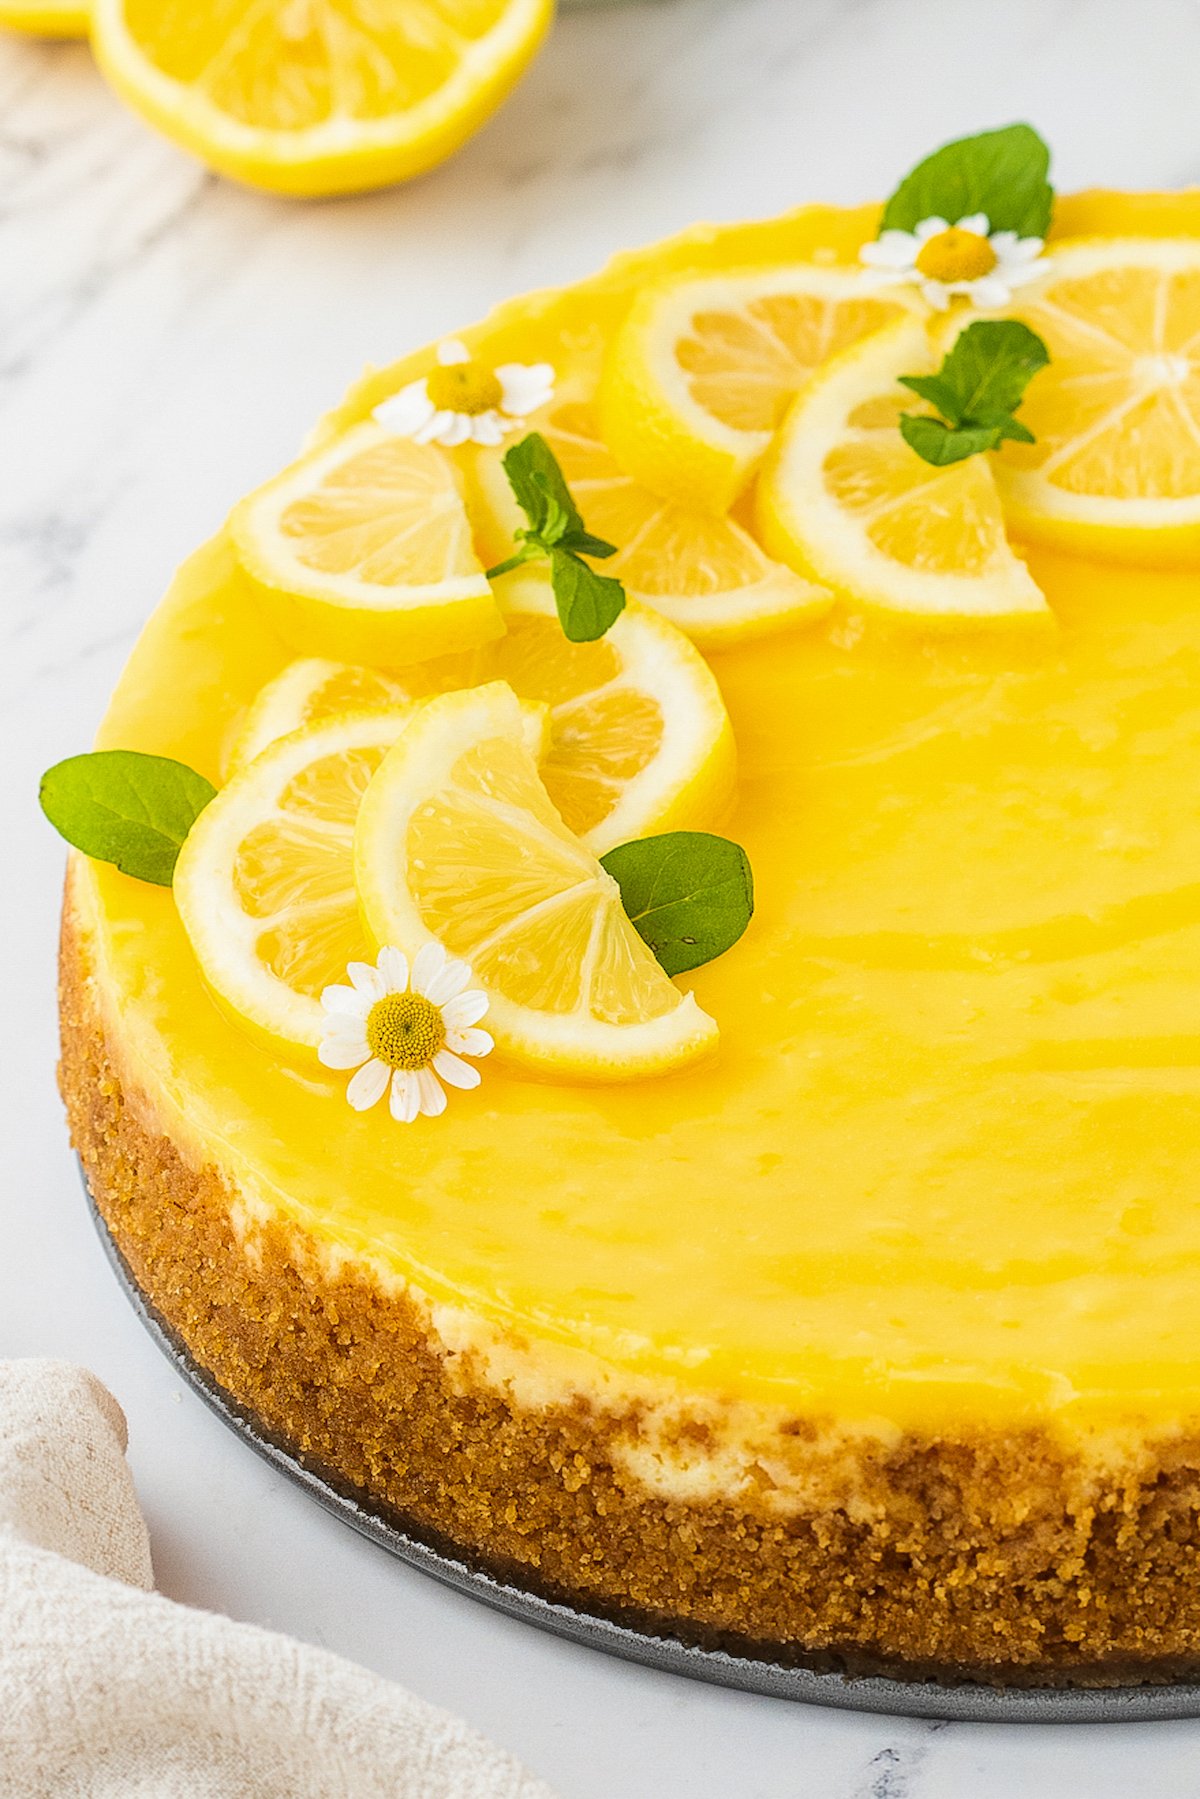 Lemon cheesecake topped with lemon curd and decorative lemon slices.